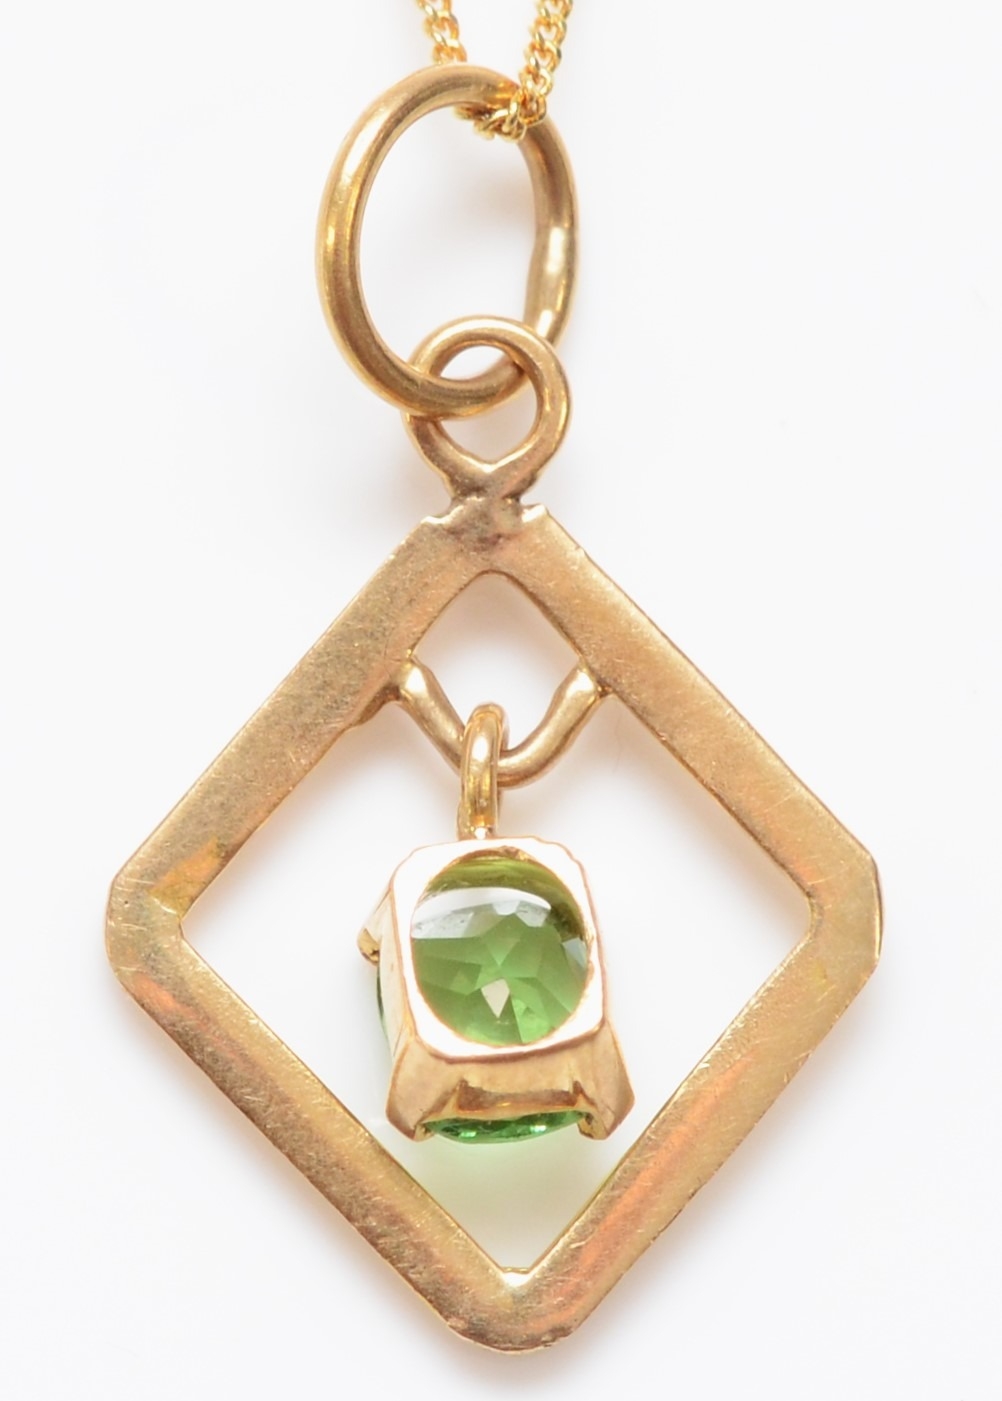 A 9ct gold and green stone pendant, 18mm, chain, 2gm - Image 2 of 2